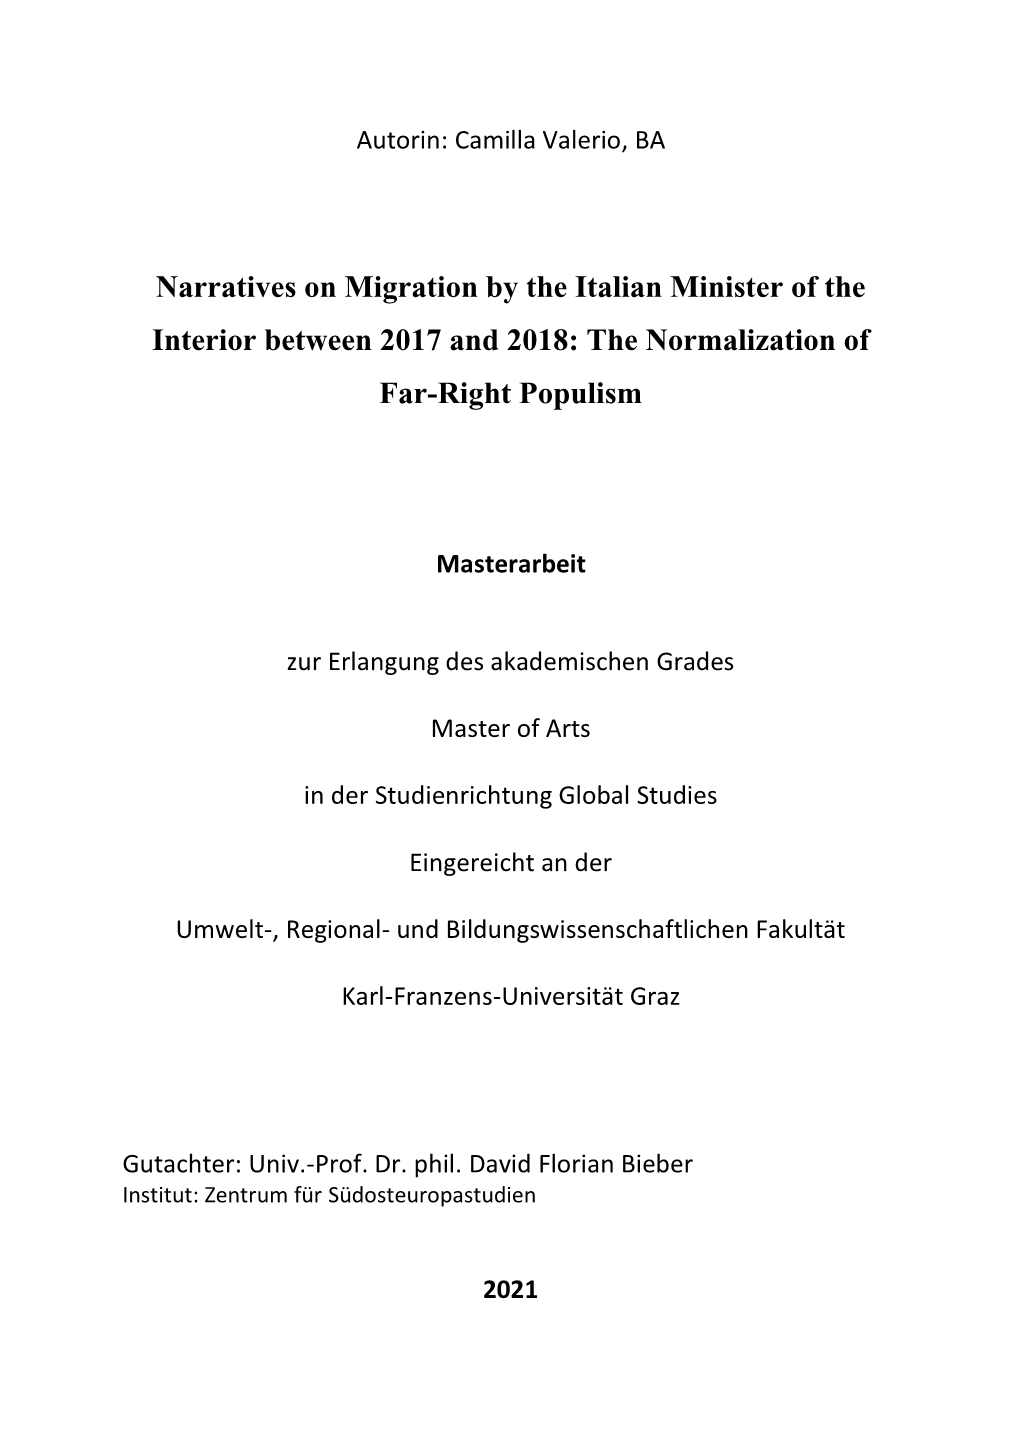 Narratives on Migration by the Italian Minister of the Interior Between 2017 and 2018: the Normalization of Far-Right Populism